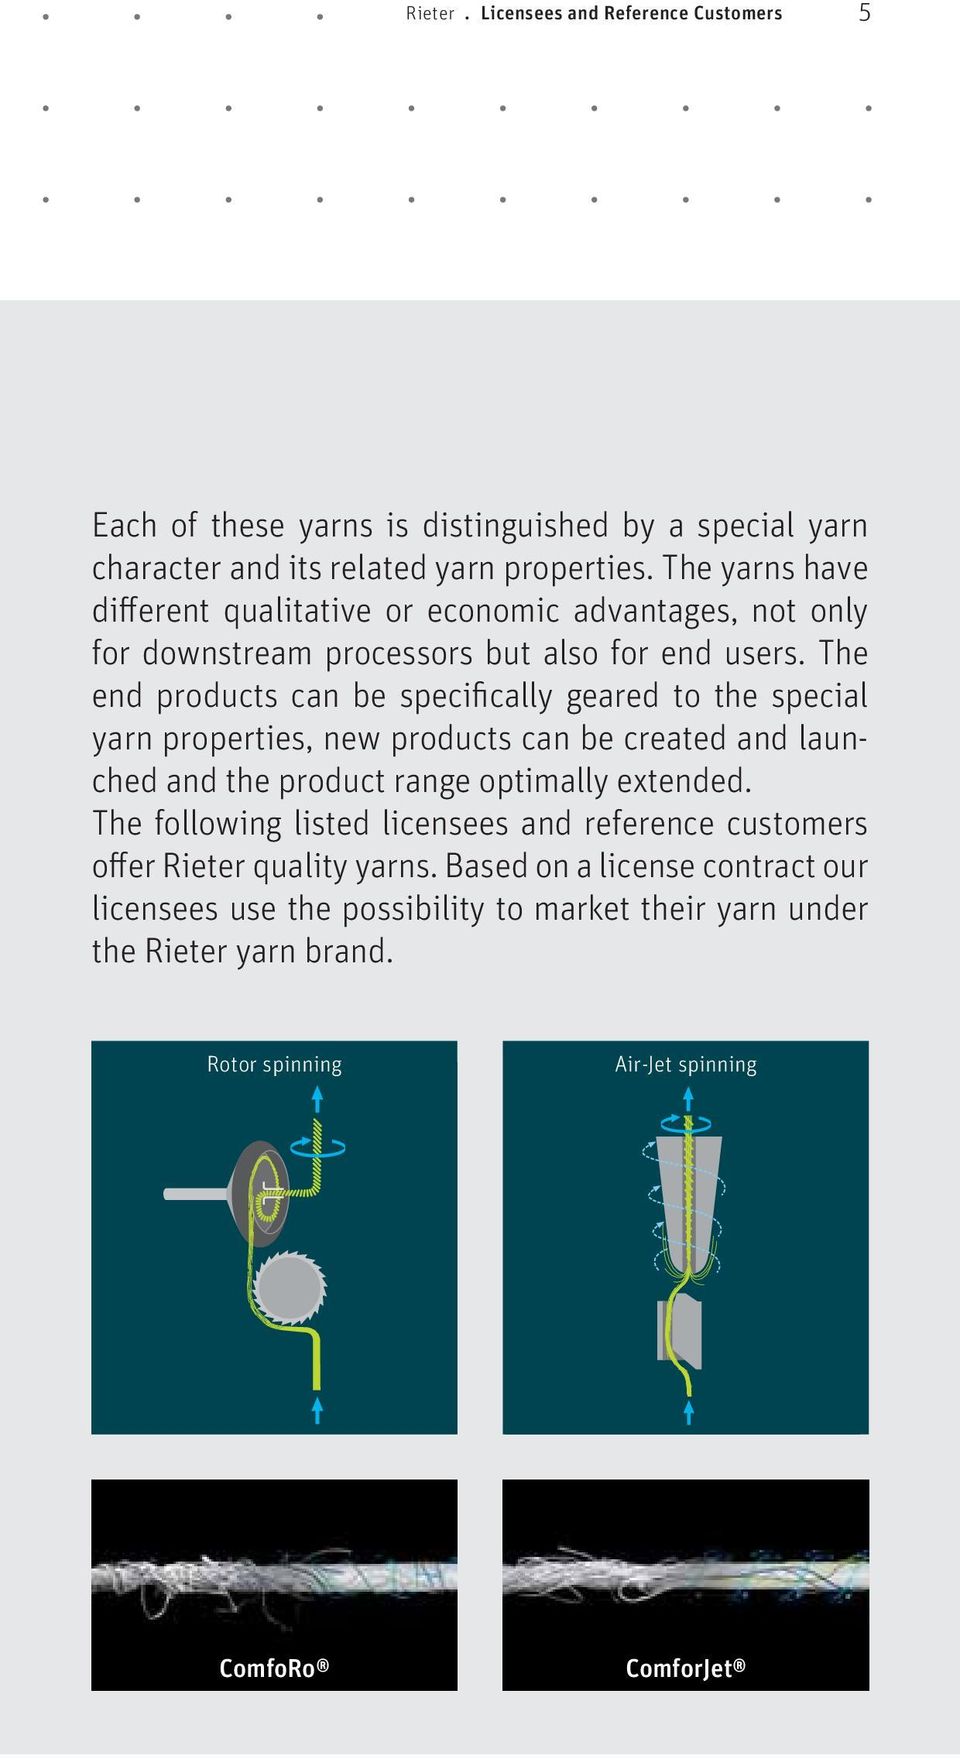 The end products can be specifically geared to the special yarn properties, new products can be created and launched and the product range optimally extended.